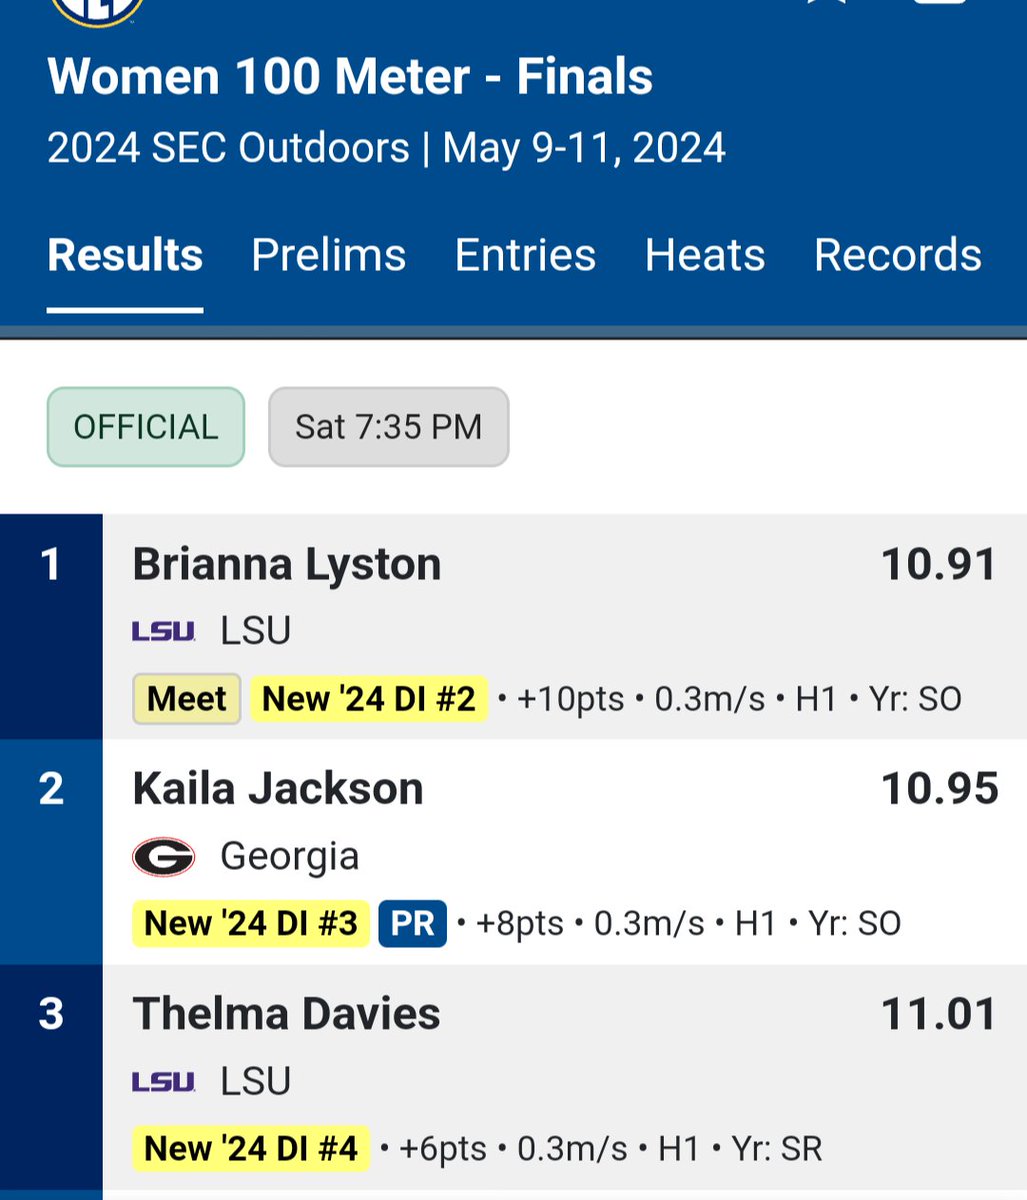 Kaila Jackson is the first woman from Michigan to break 11-seconds in the 100! @Kailatrackstar